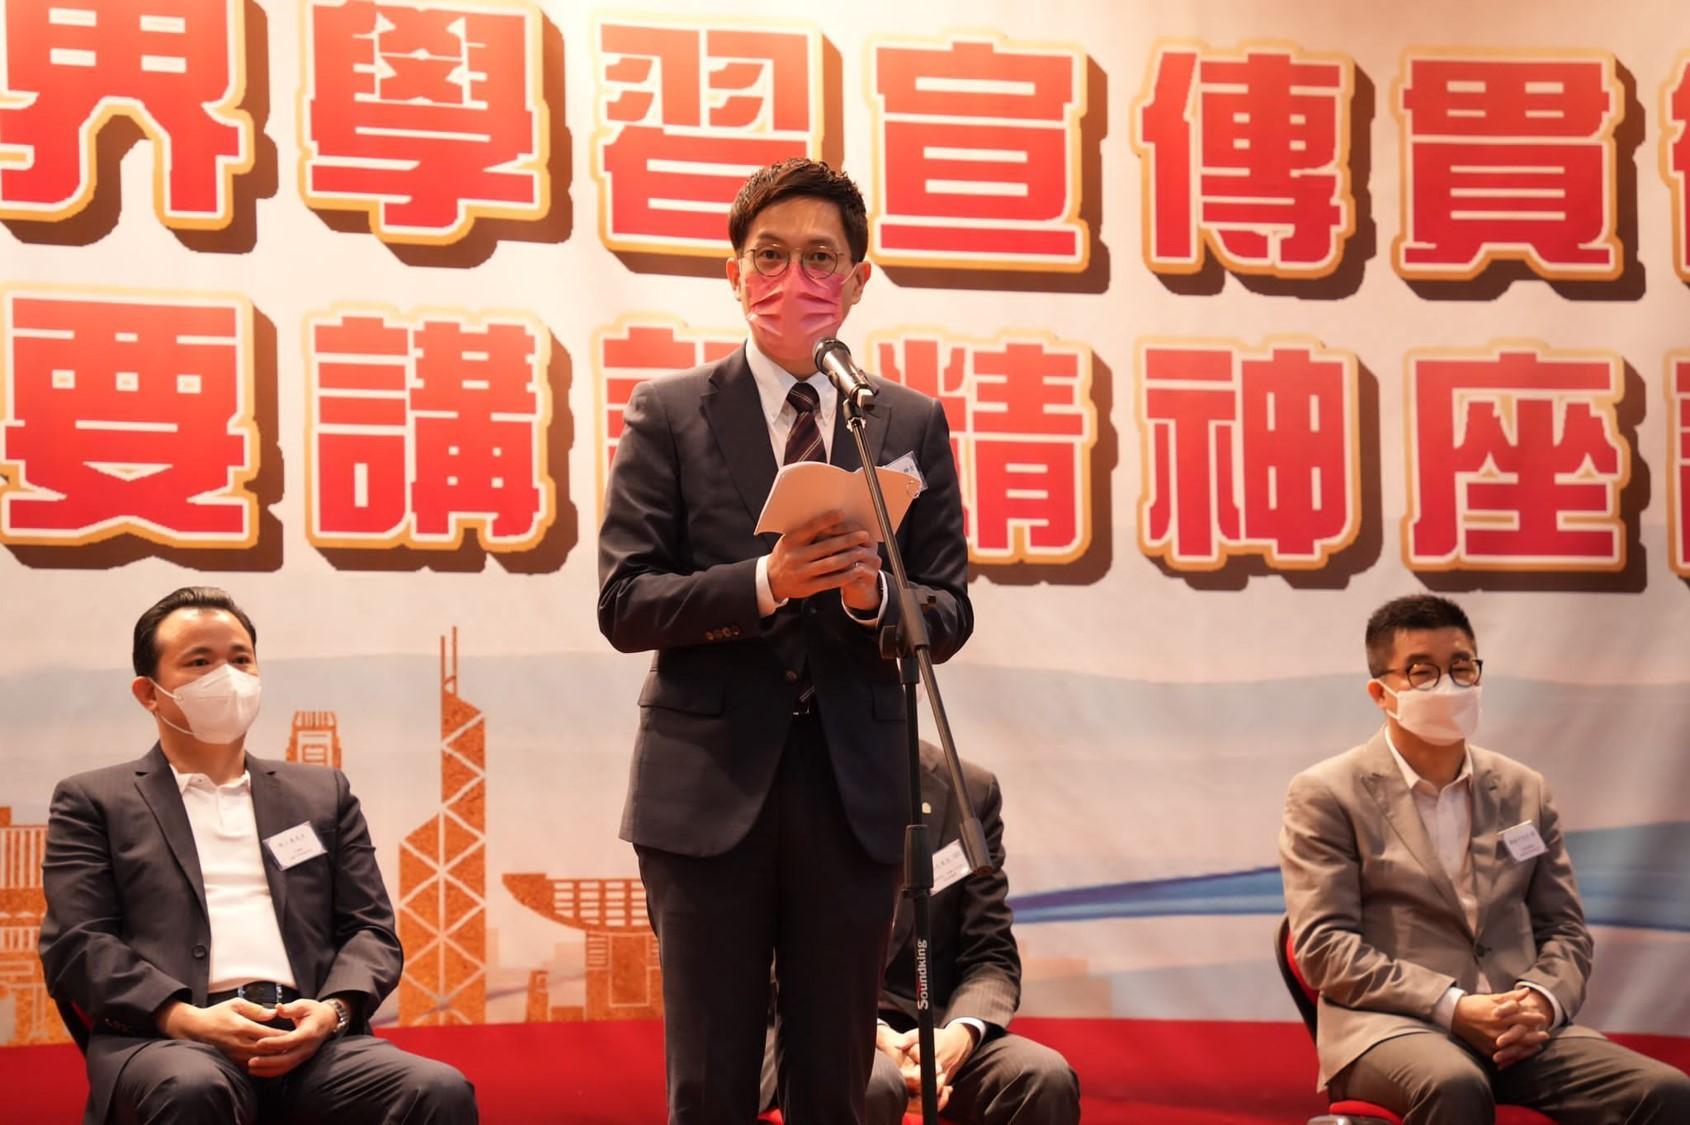 The Kwun Tong District Office, Sha Tin District Office, Yau Tsim Mong District Office and Yuen Long District Office held sessions on July 6, 7 and 8 respectively on "Spirit of the President's Important Speech". Photo shows the District Officer (Kwun Tong), Mr Andy Lam, delivering a speech at the session today (July 8).